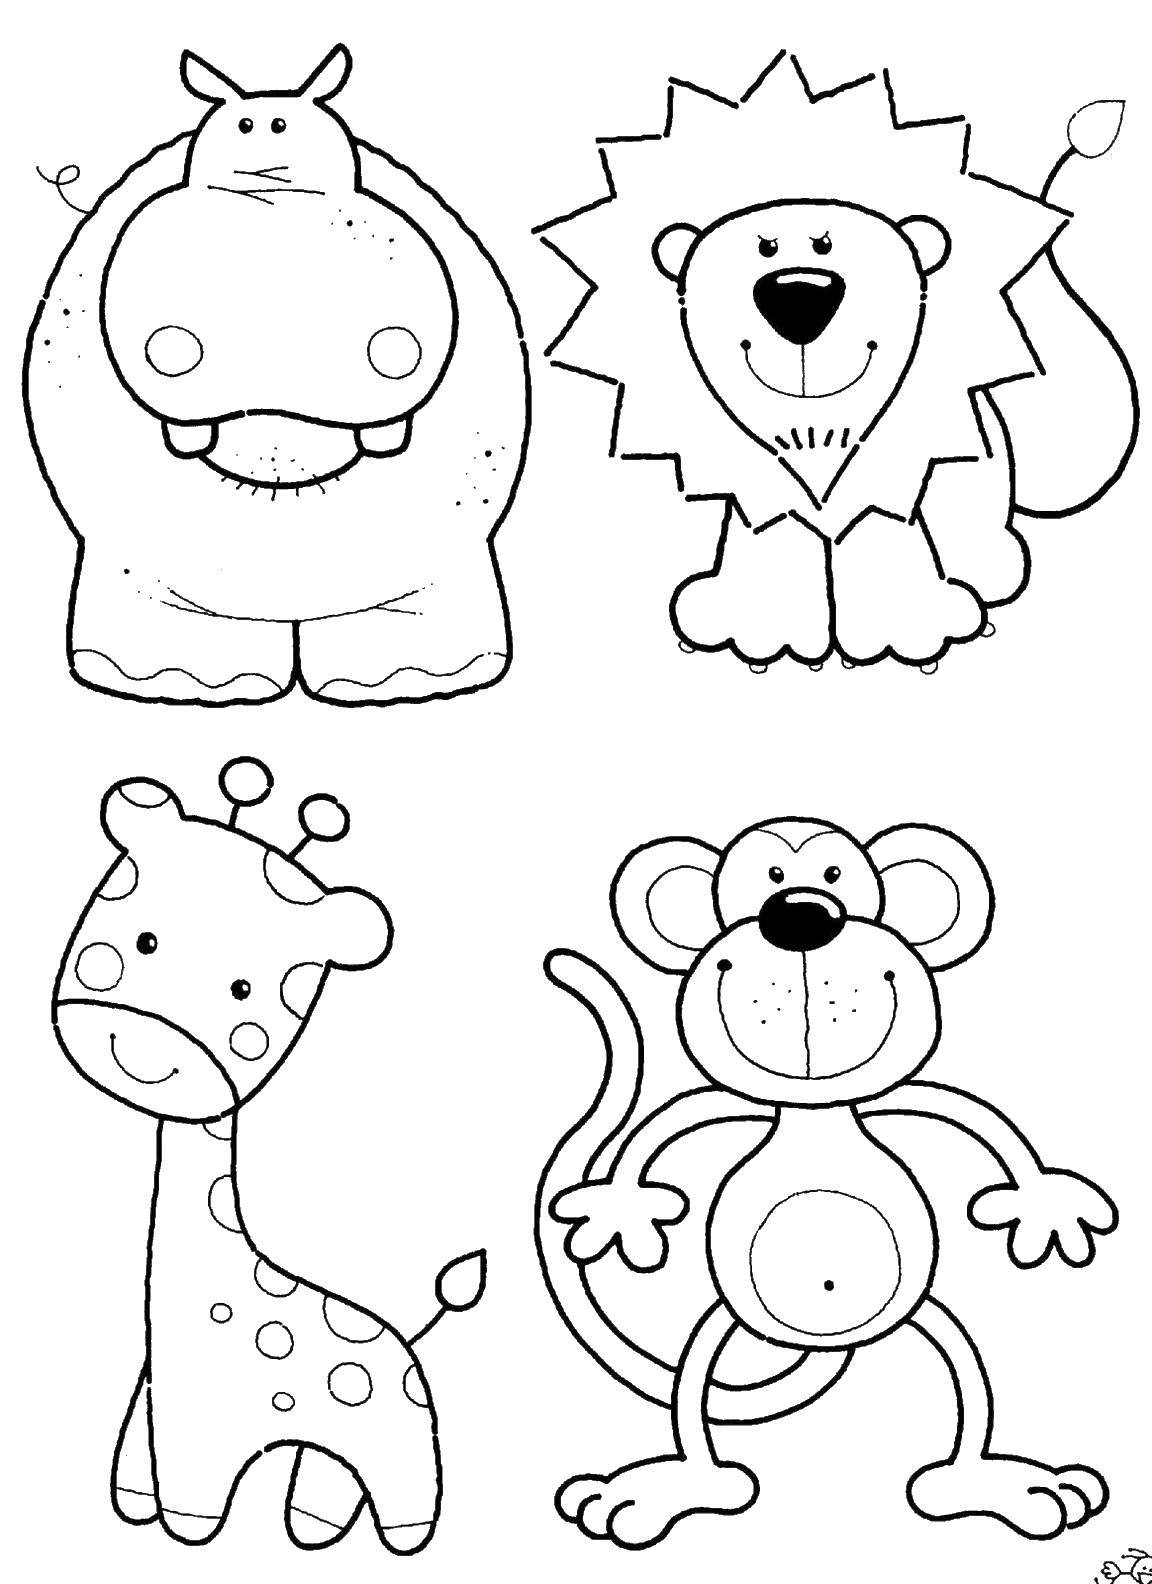 Coloring Lion, Hippo, monkey and ... ... best friends. Category Coloring pages for kids. Tags:  Animals, kitten.